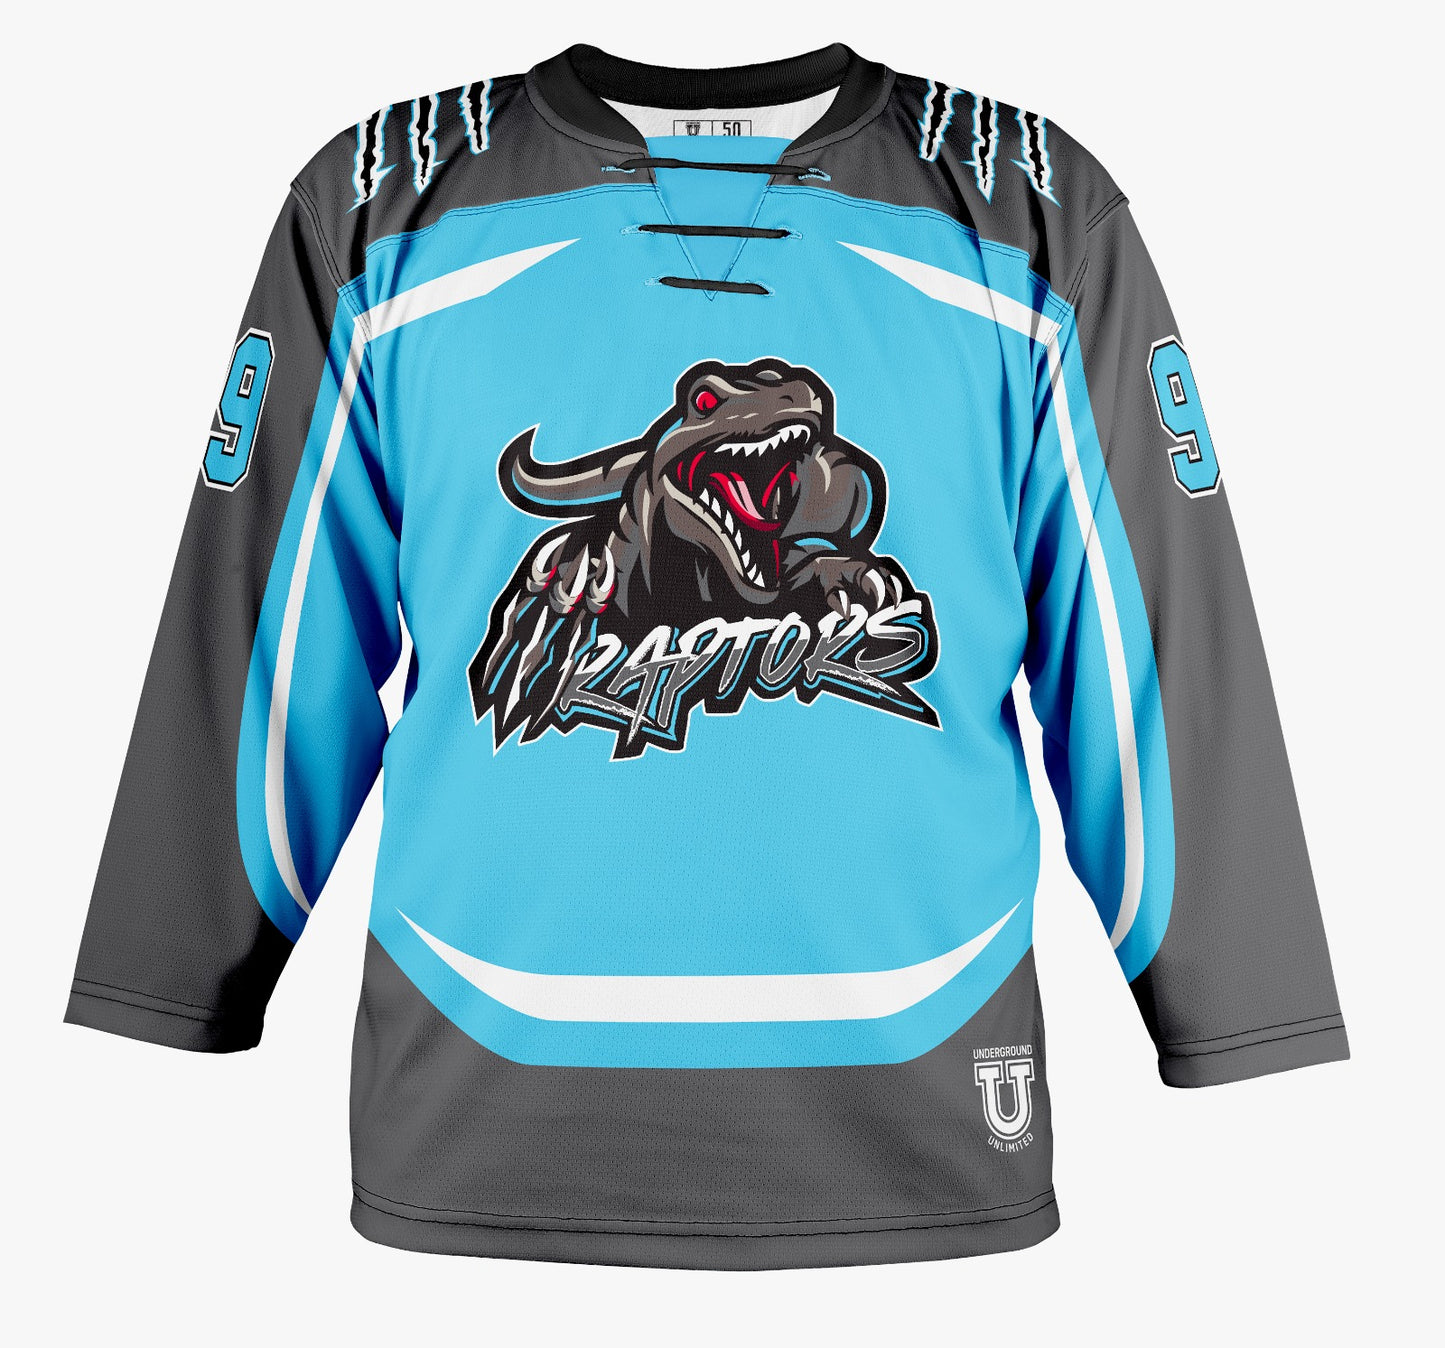 *NEW PLAYER or U10 AND YOUNGER* Delmarva Raptors Player Uniform Bundle {WITHOUT Shells}